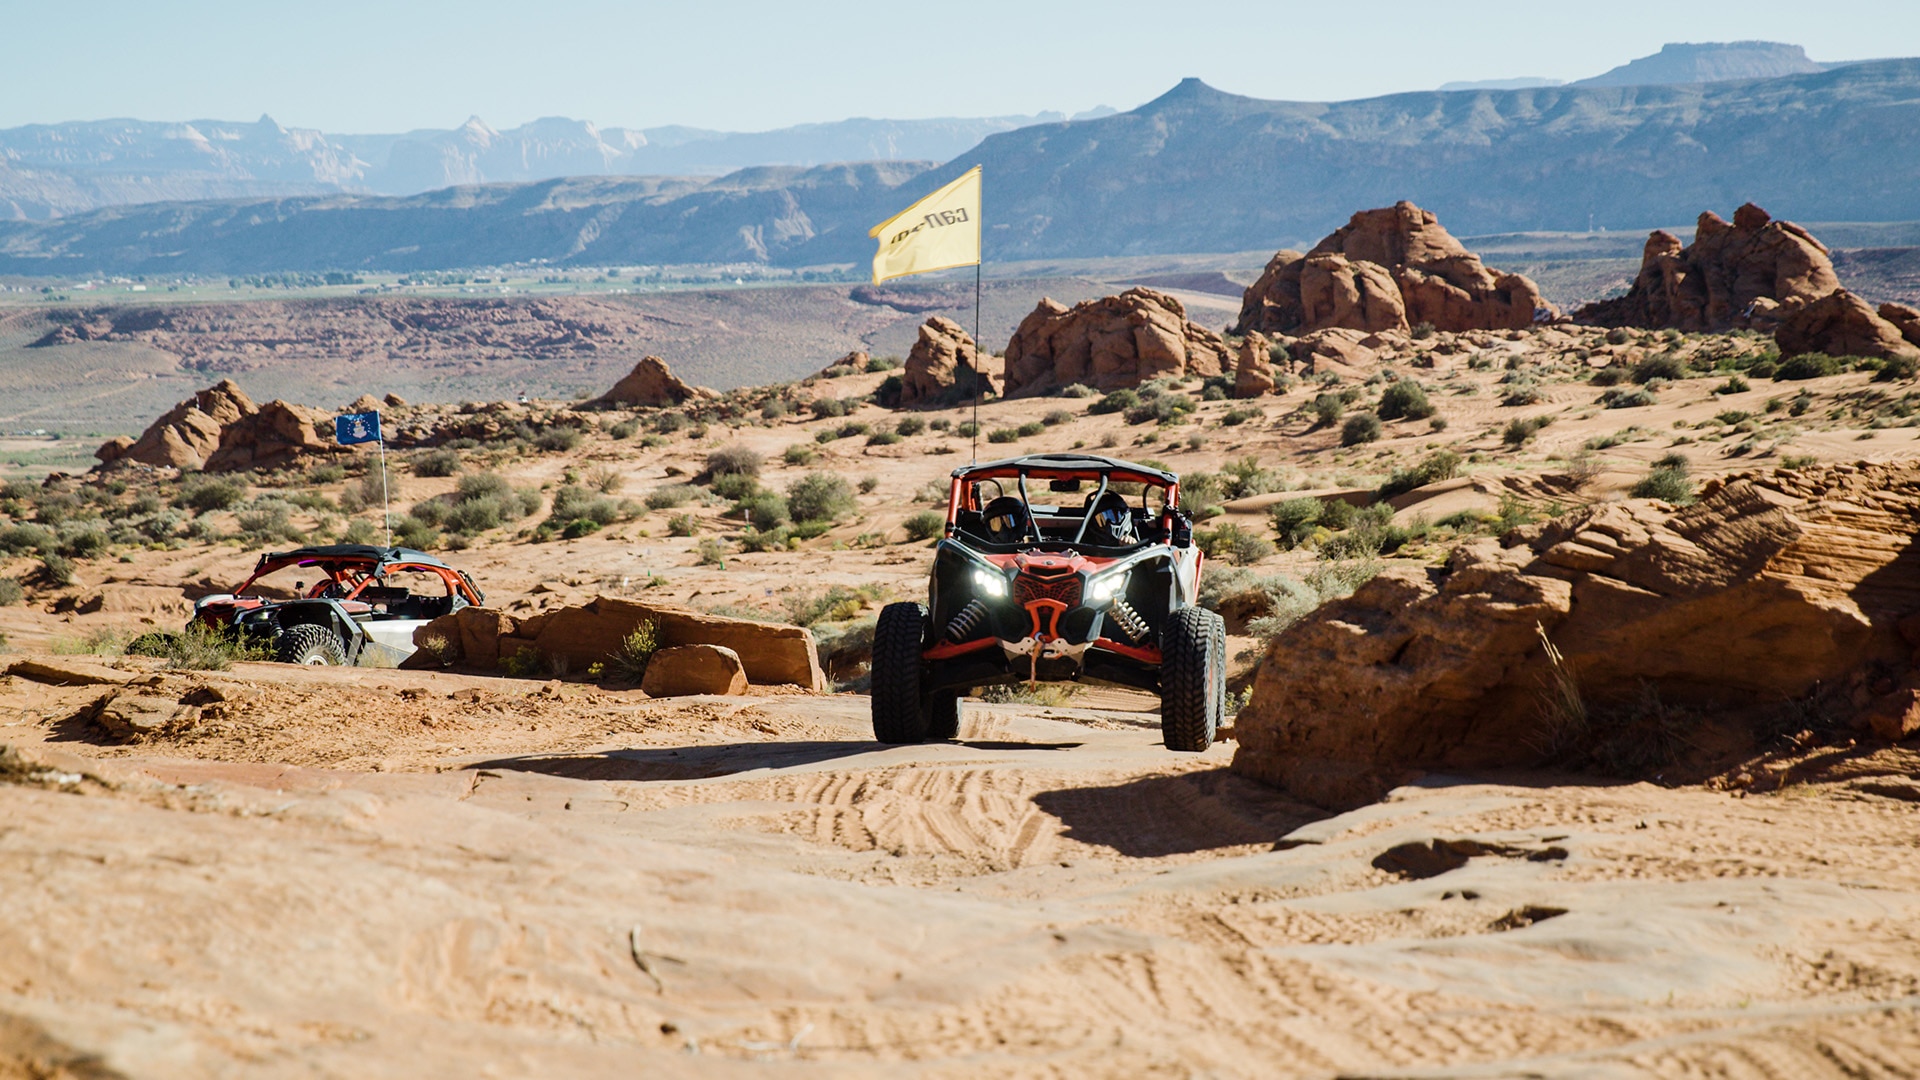 Can-Am SxS vehicle riding in the desert